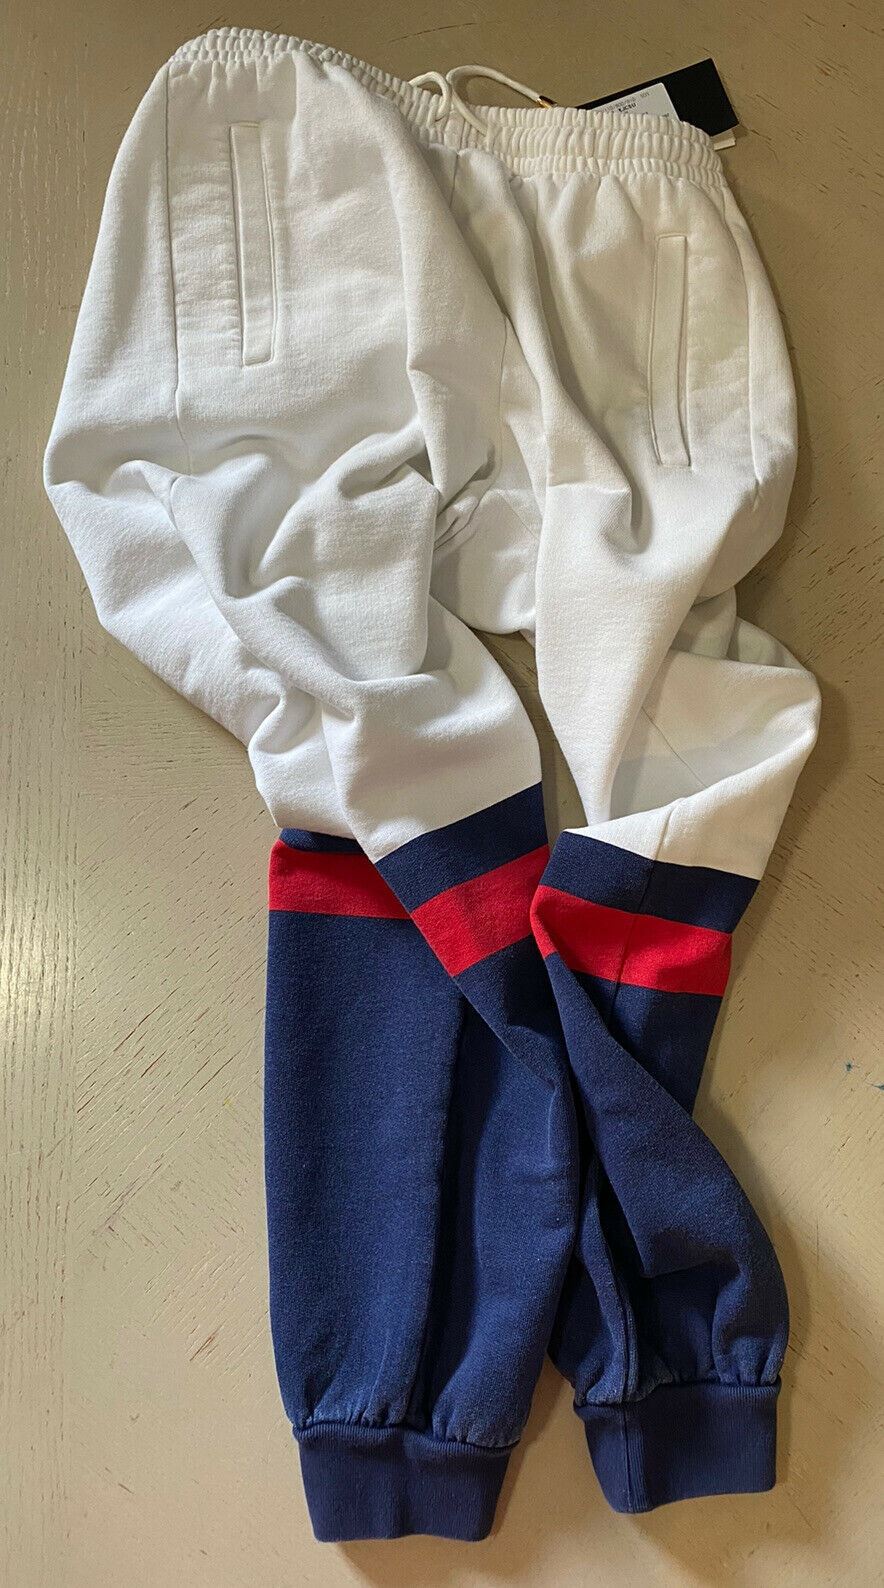 NWT Gucci  Men’s Sweatpants Pants White/Red/Blue Size M Italy